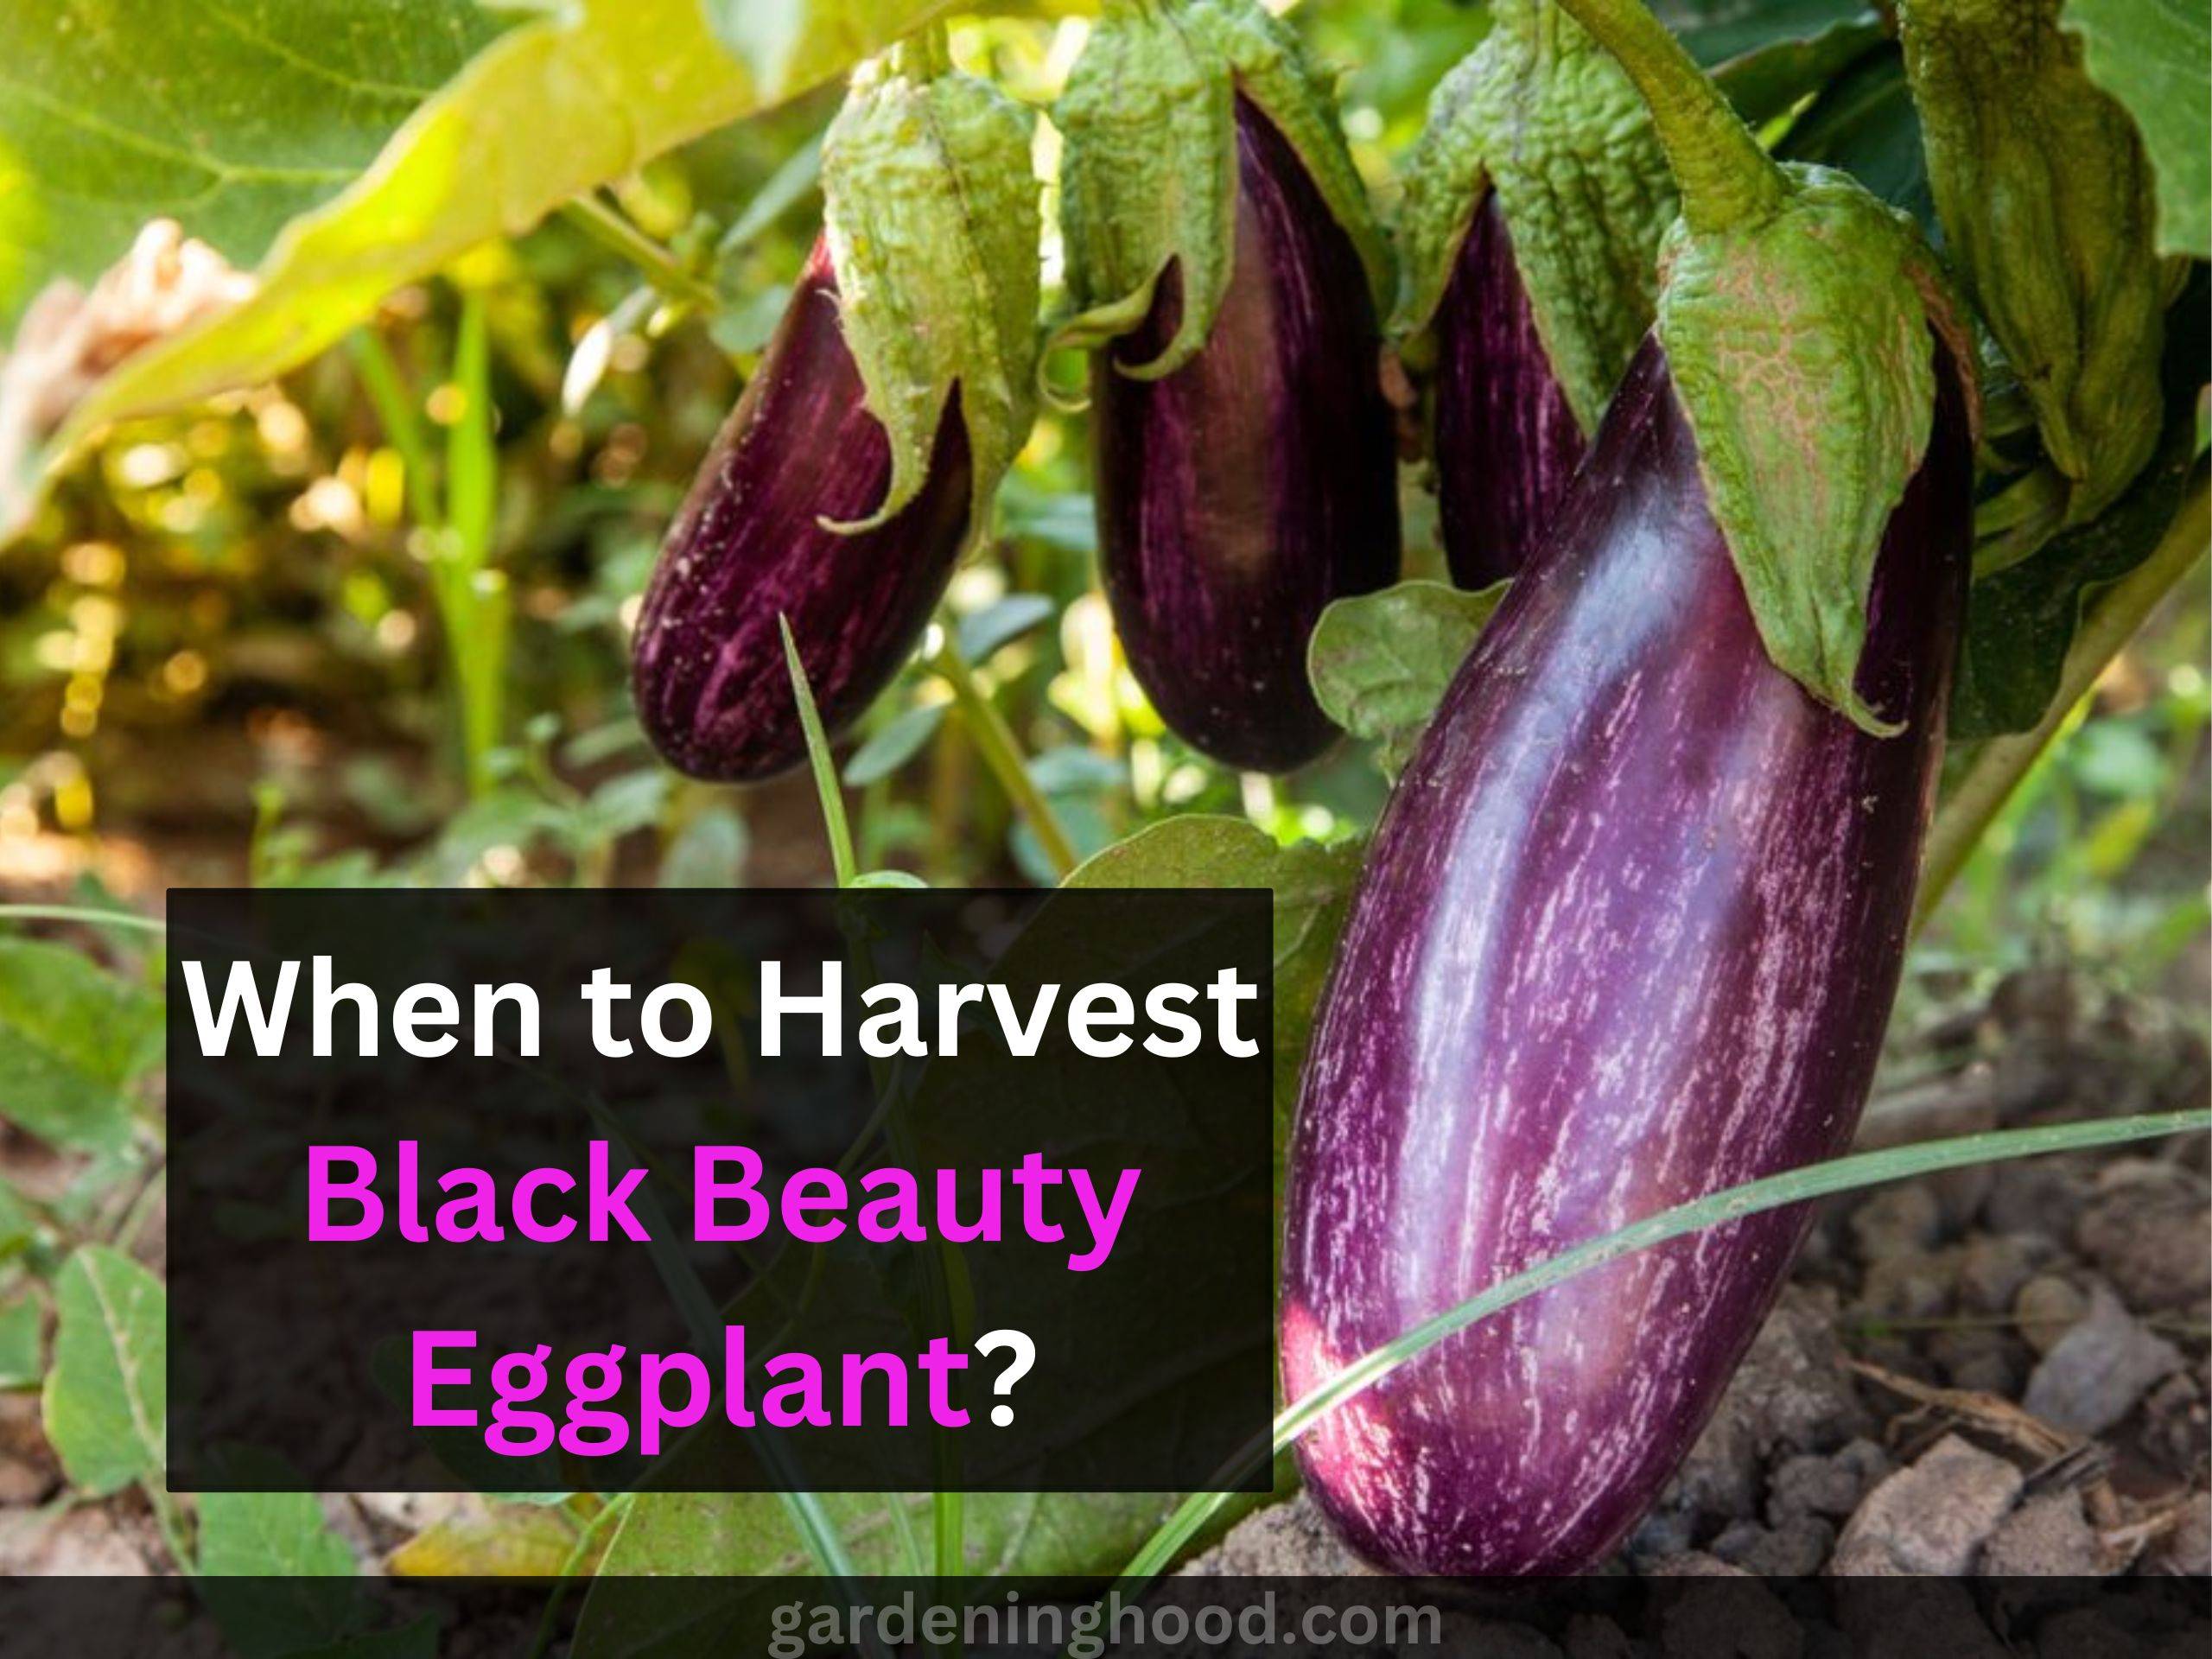 When to Harvest Black Beauty Eggplant?